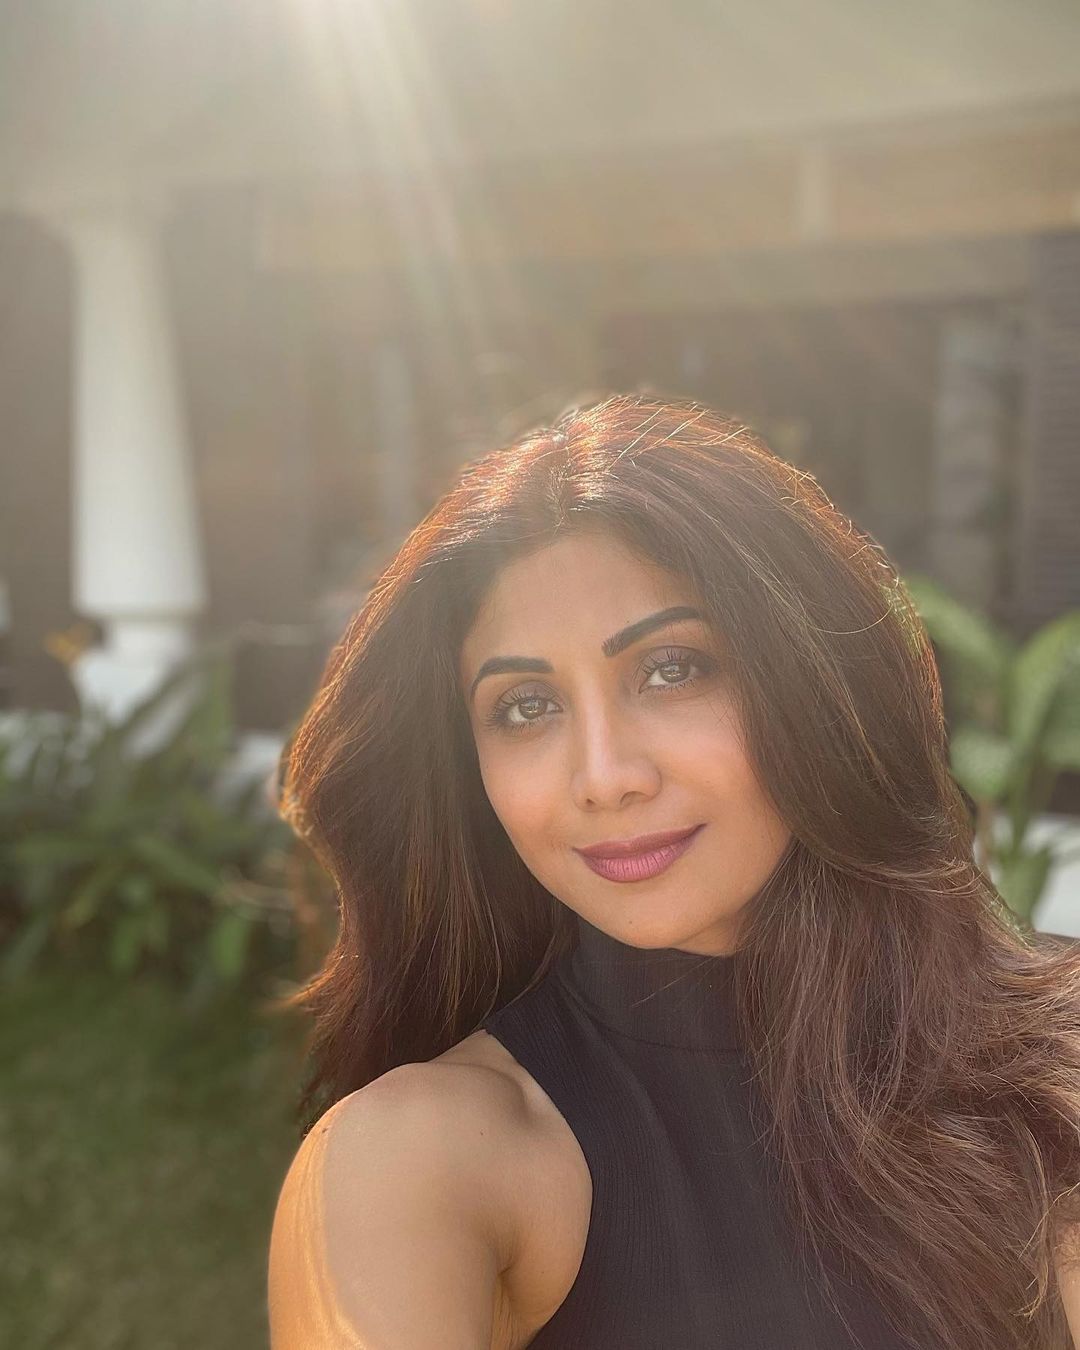 Bombay HC on Shilpa Shetty's move against media houses: "Your prayer to exercise control over editorial content is dangerous"